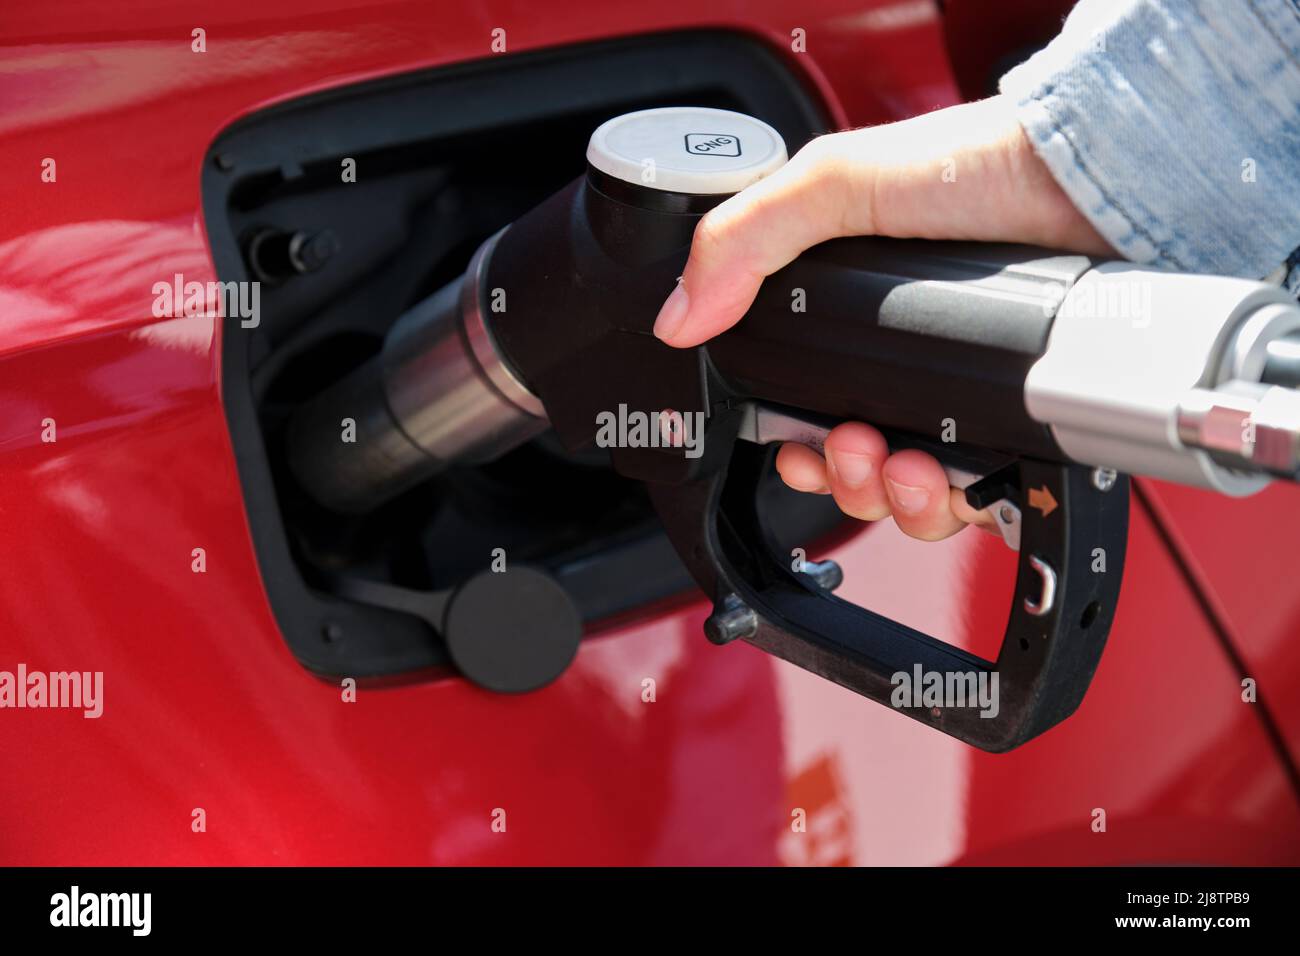 woman hand fueling car with Compressed Natural Gas (CNG) Stock Photo